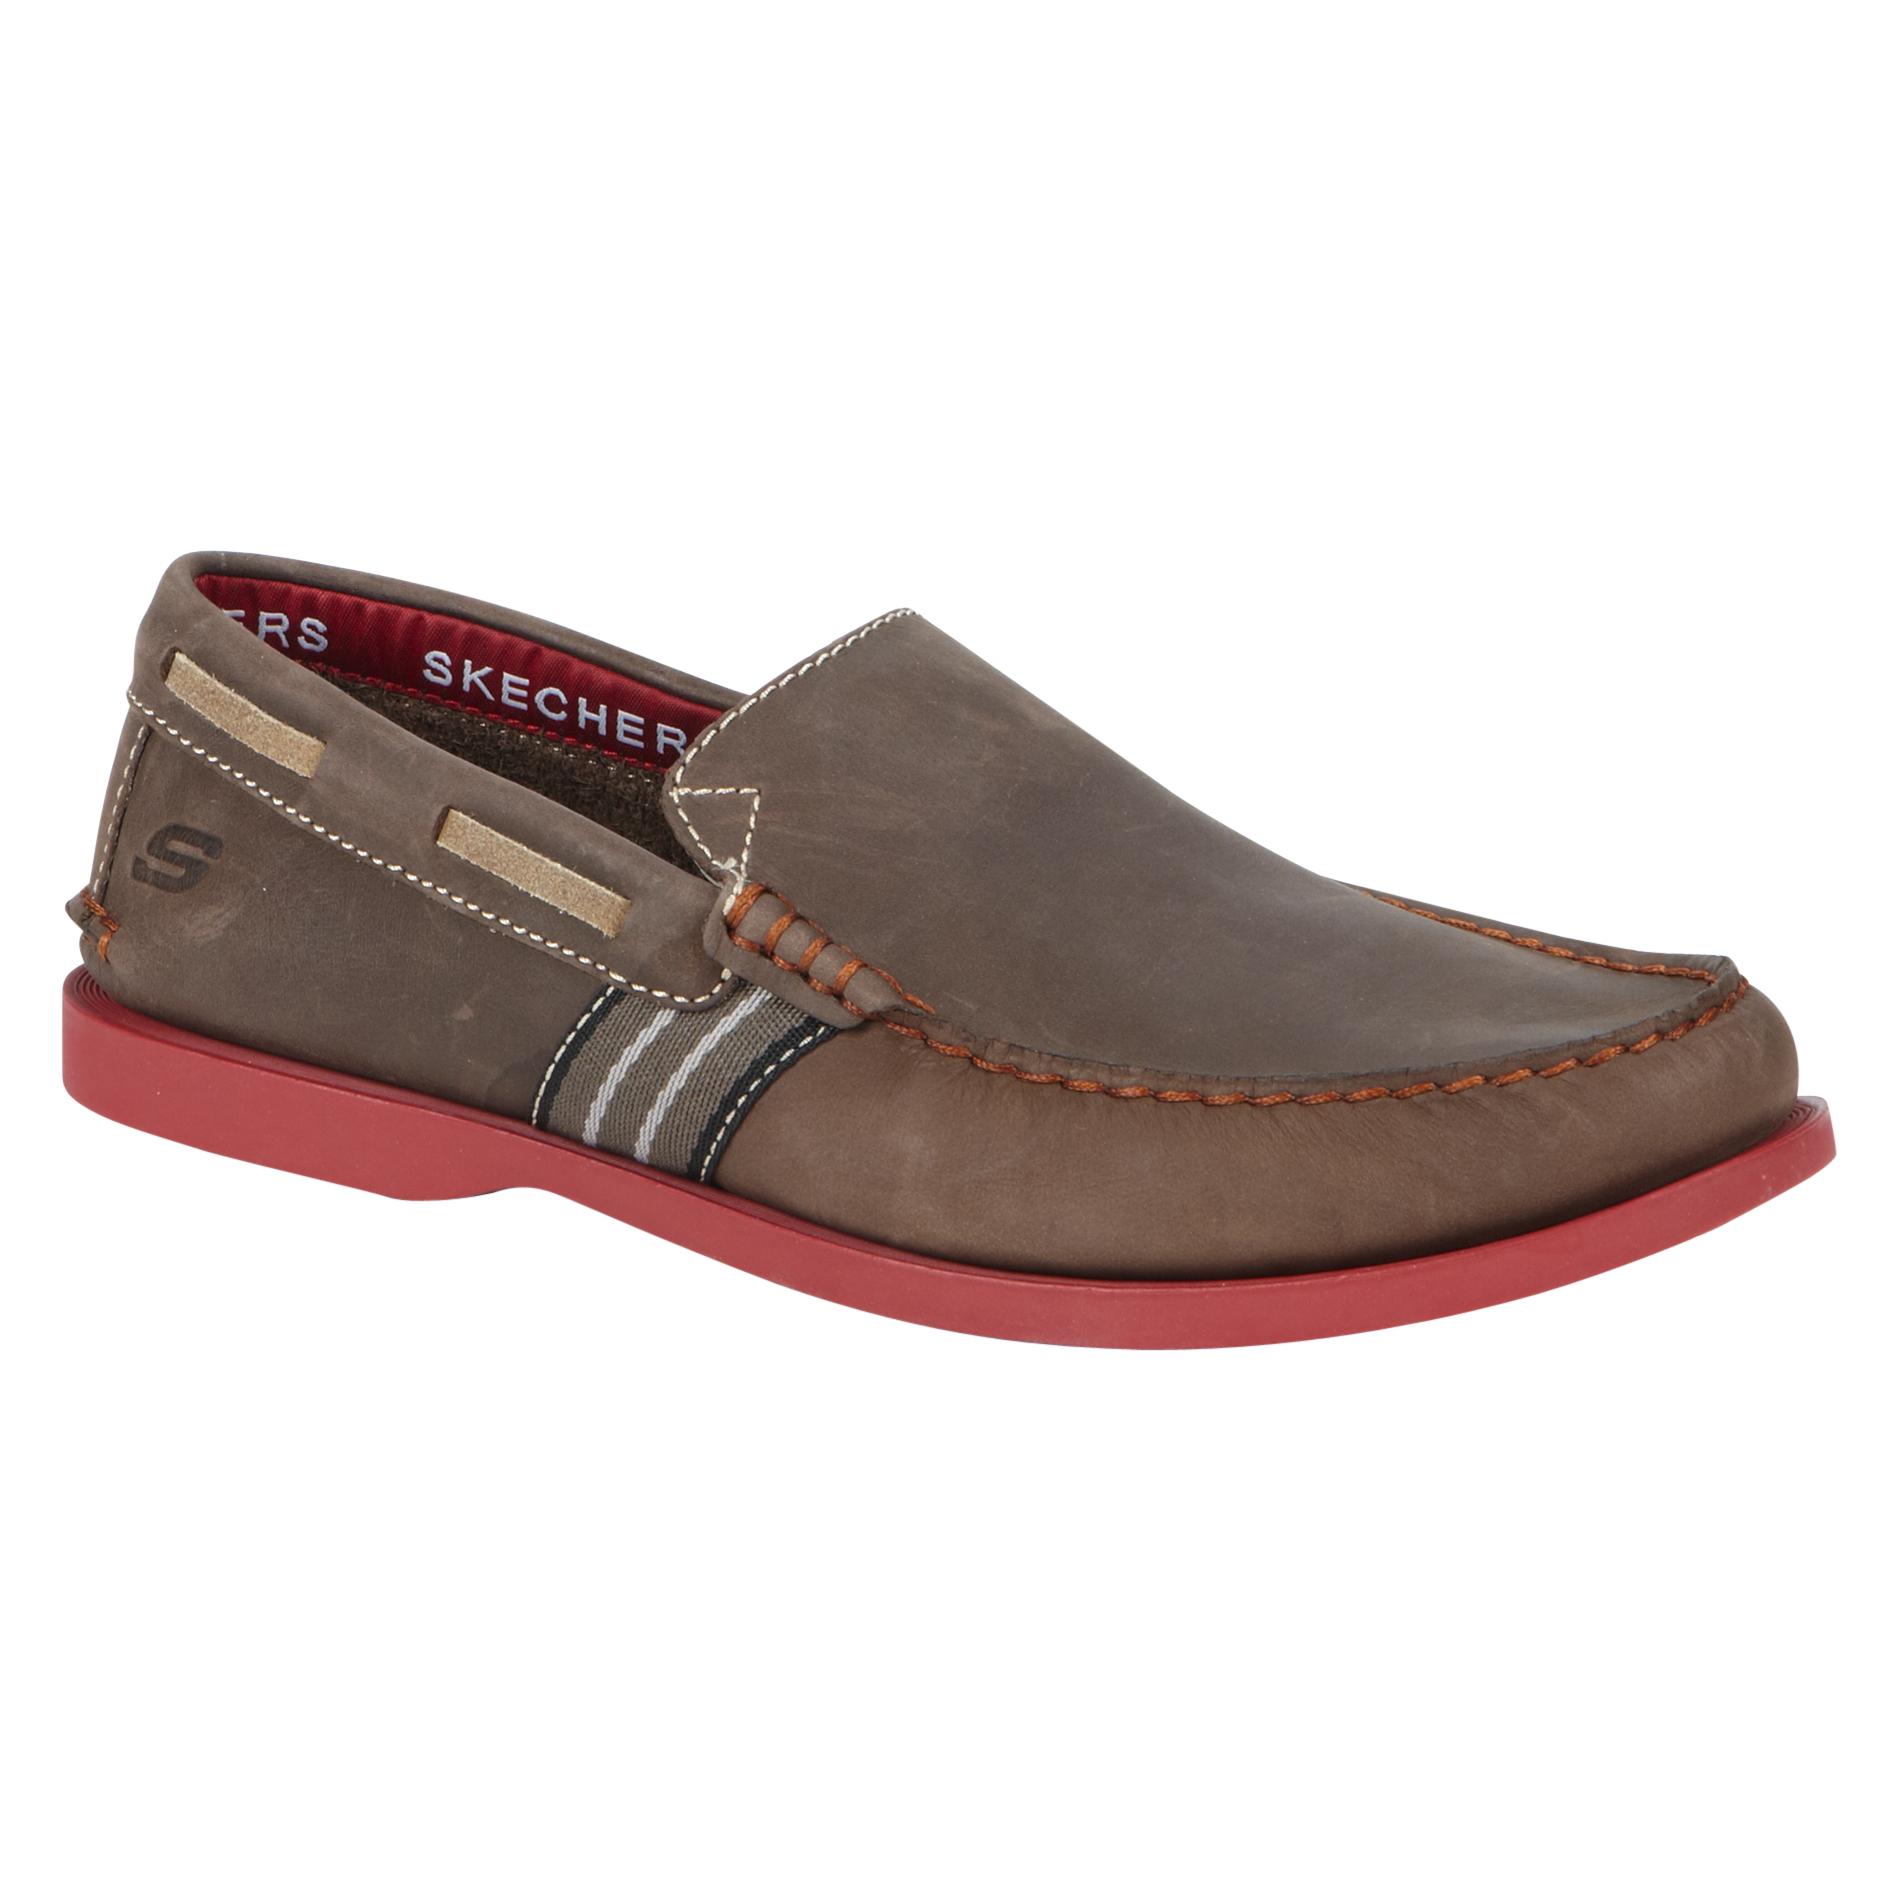 Skechers Men's Abalo Leather Loafer - Brown